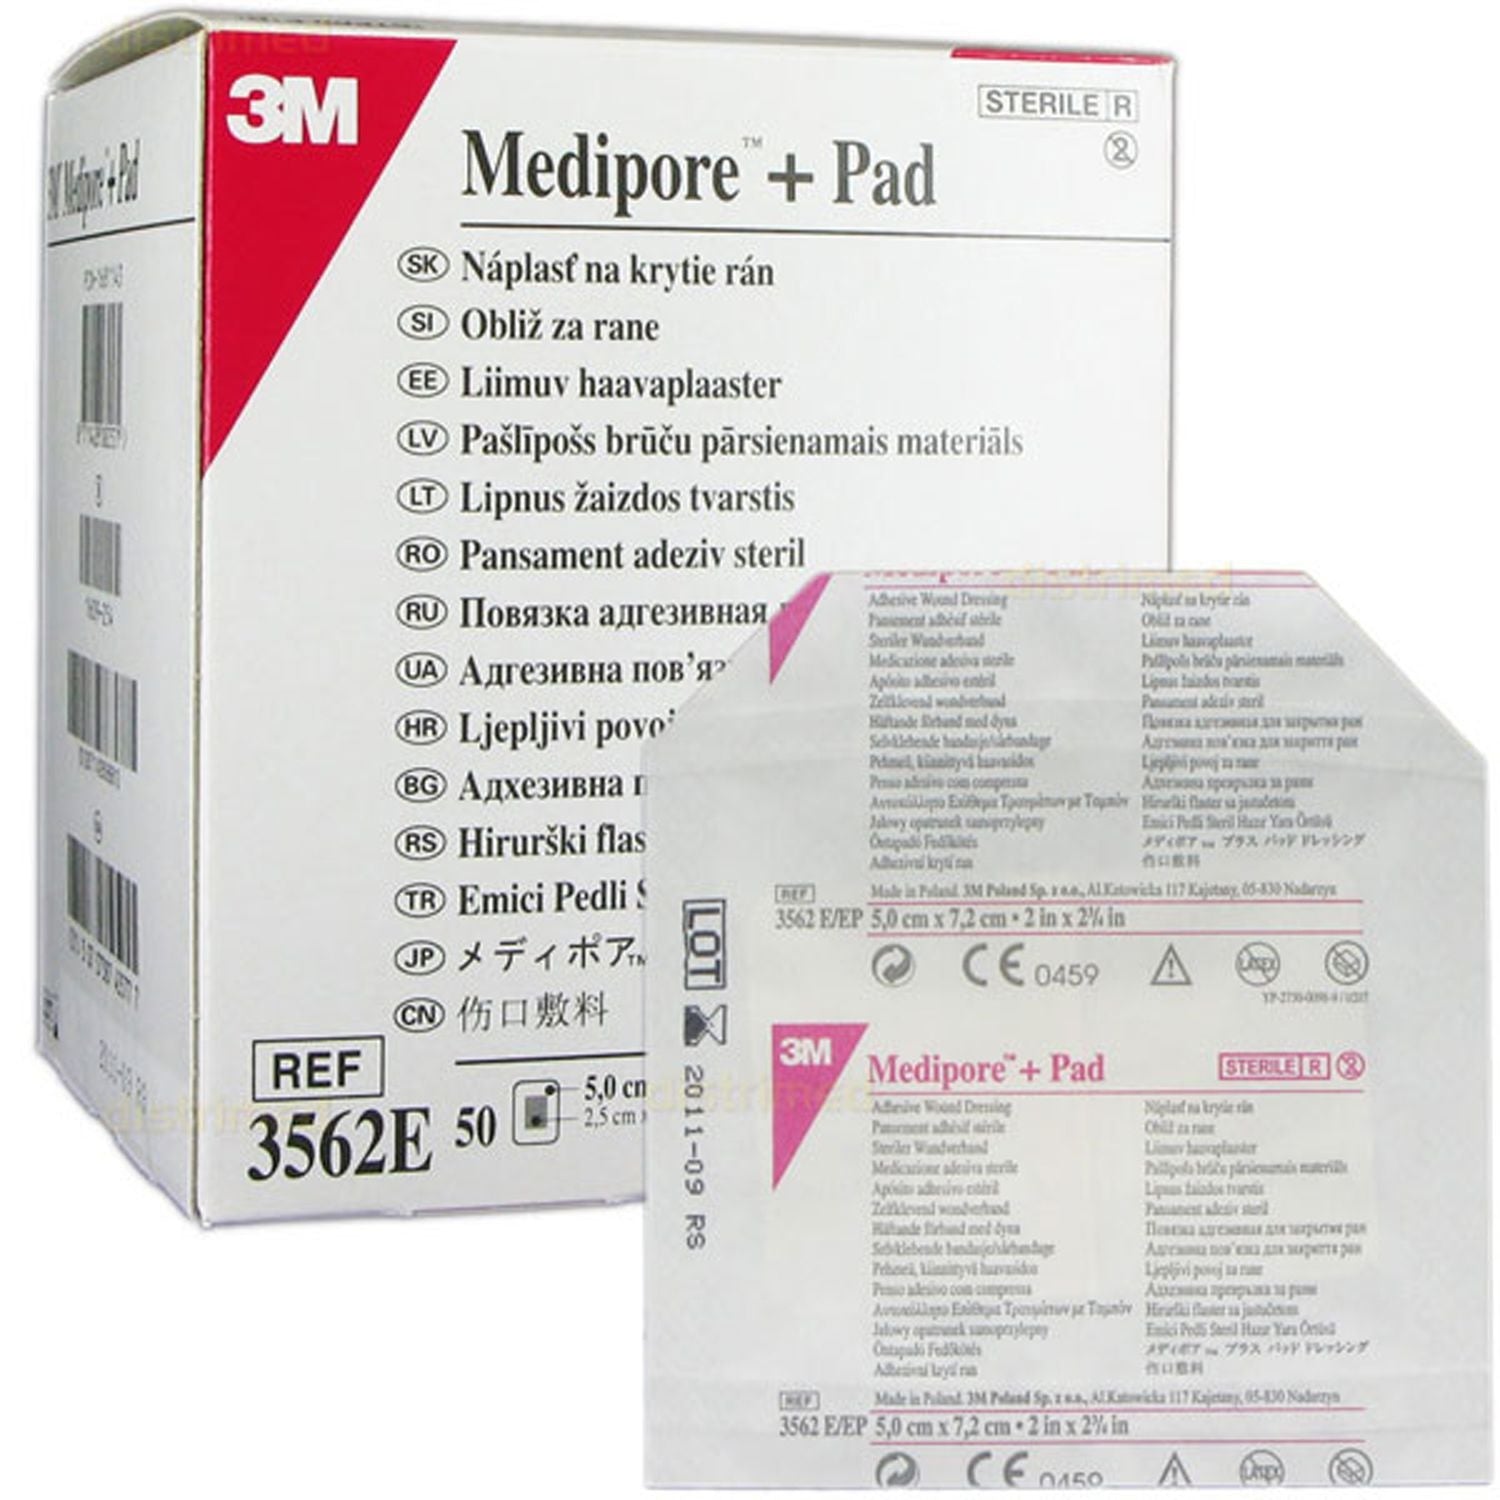 3M Medipore + Pad Adhesive Wound Dressing | 10 x 10cm | Pack of 25